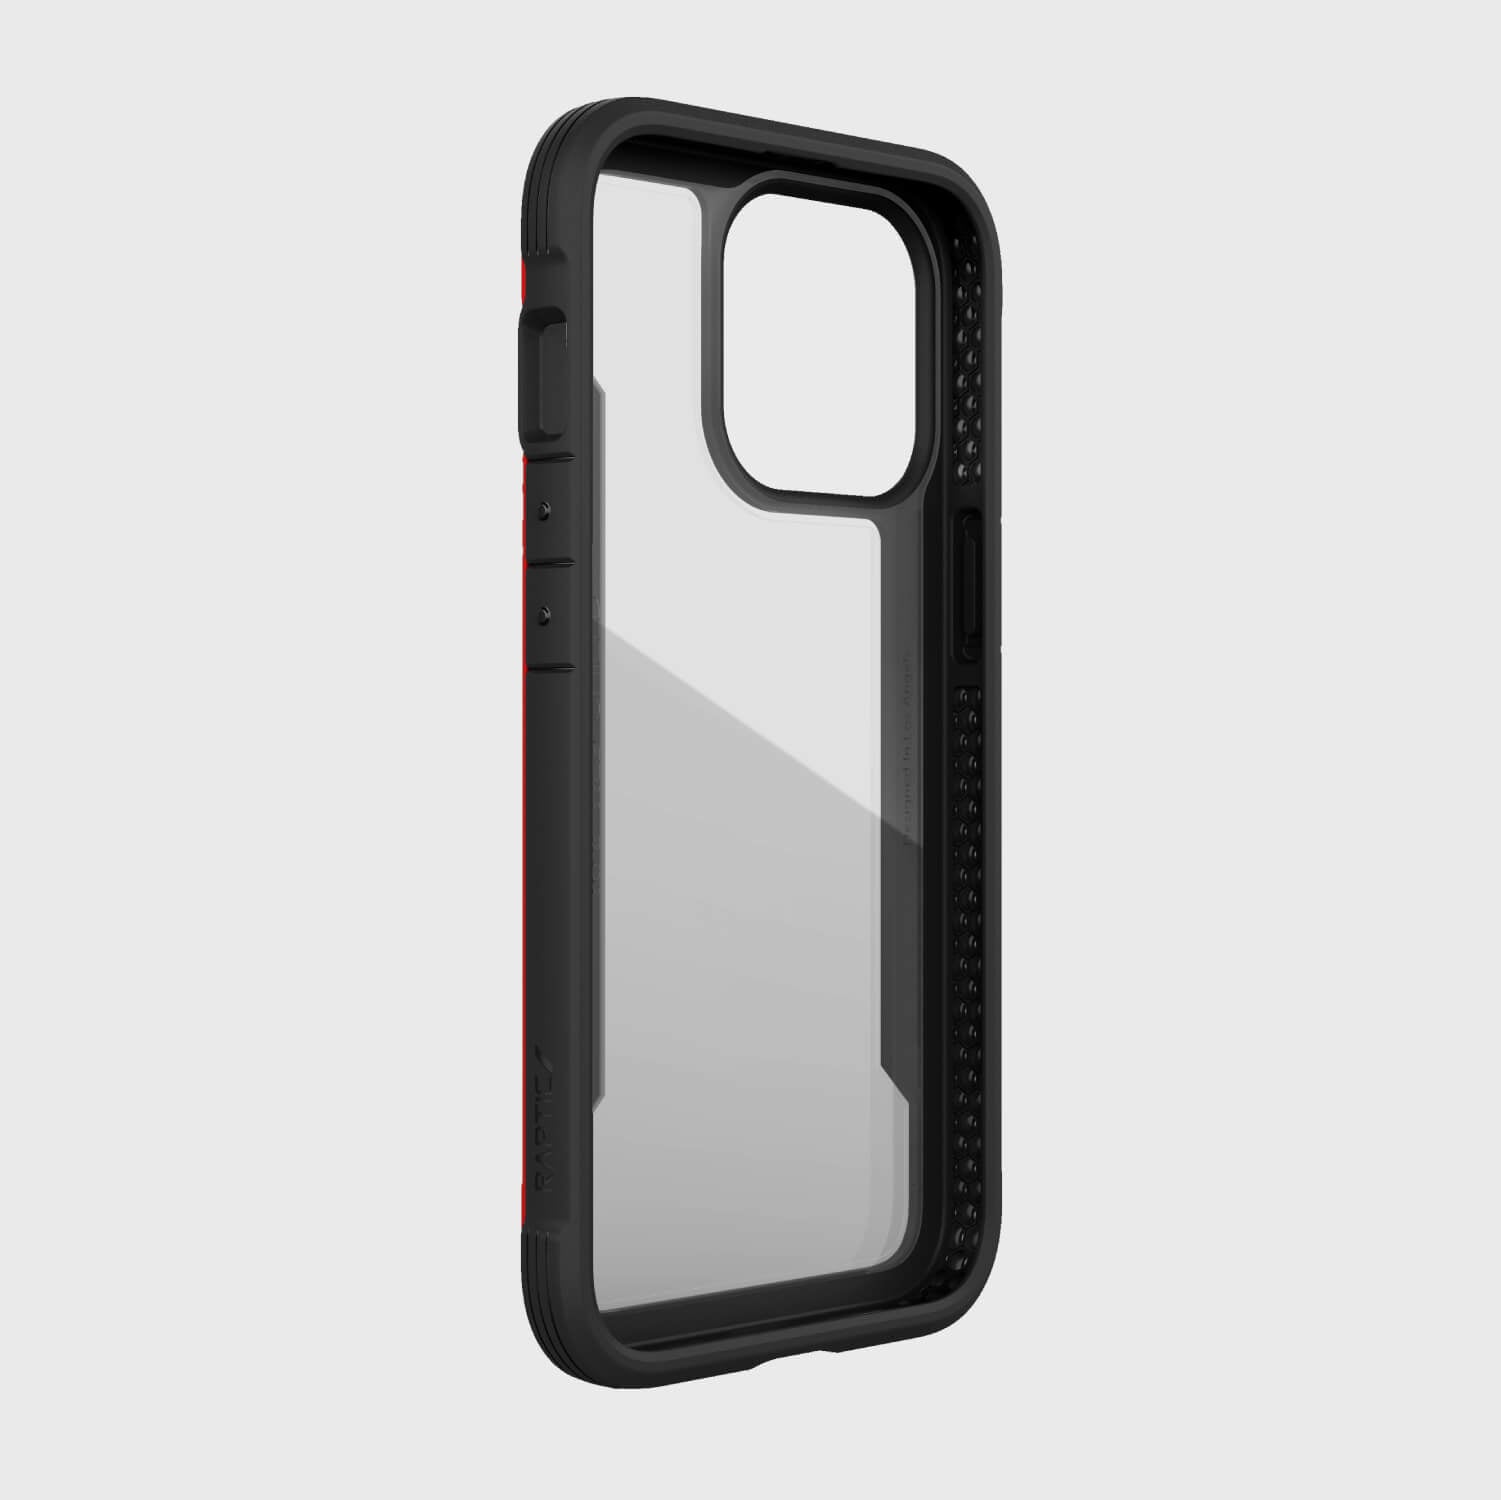 The SHIELD PRO iPhone 13 Pro case by Raptic provides 13 foot drop protection and comes in a sleek black and red design.